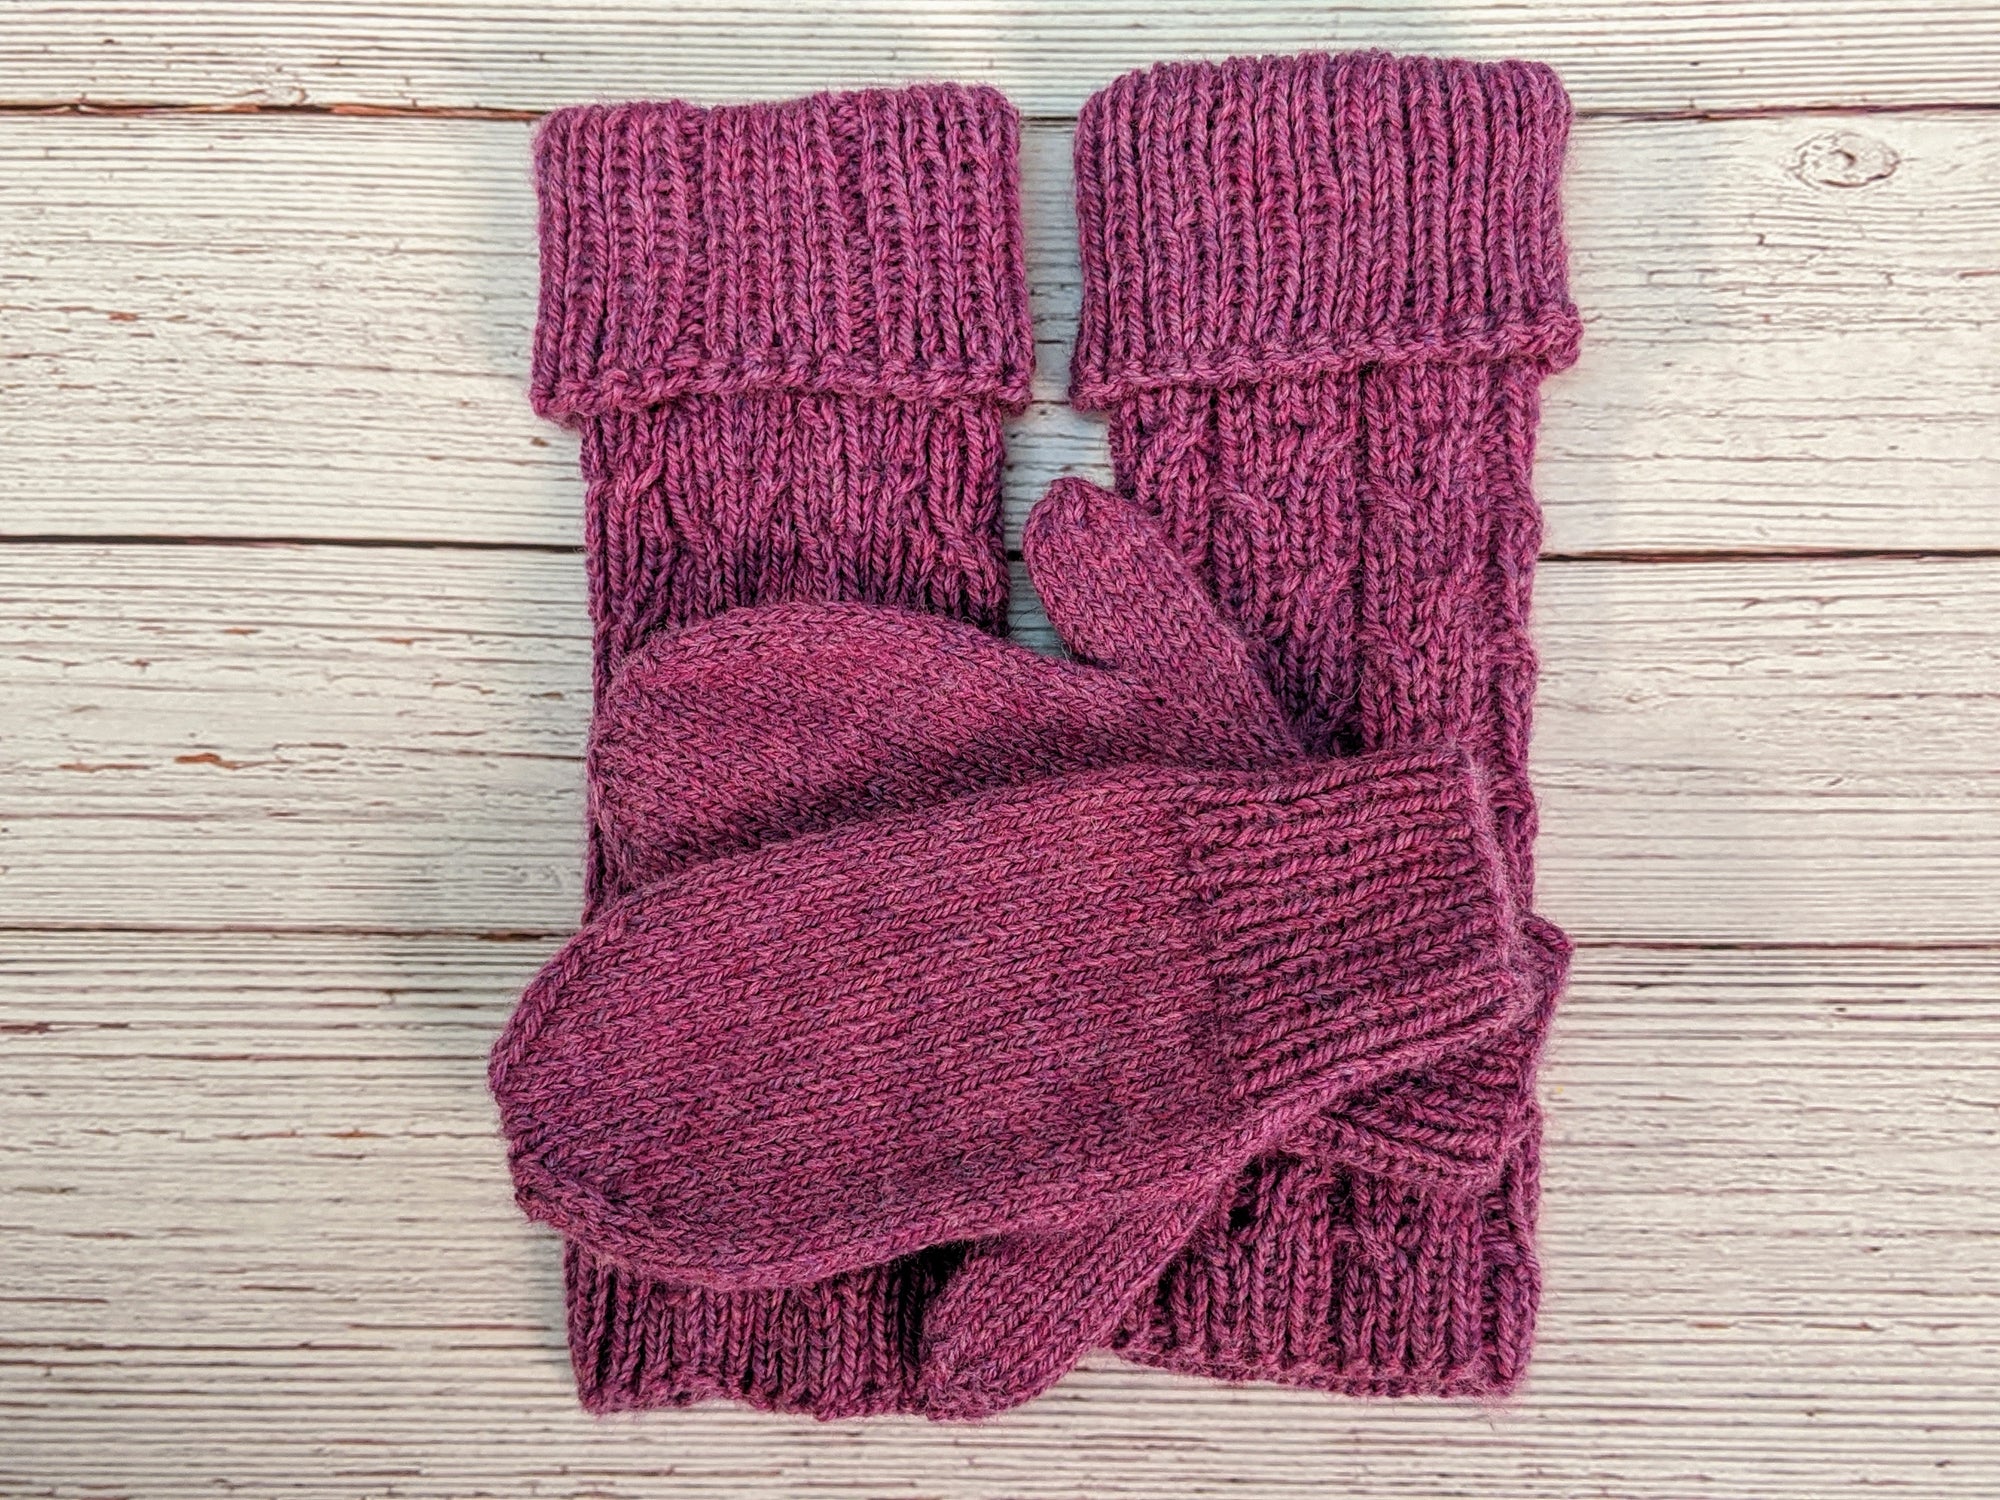 Mischa's Mittens and Leg Warmers – Two Free Knitting Patterns!